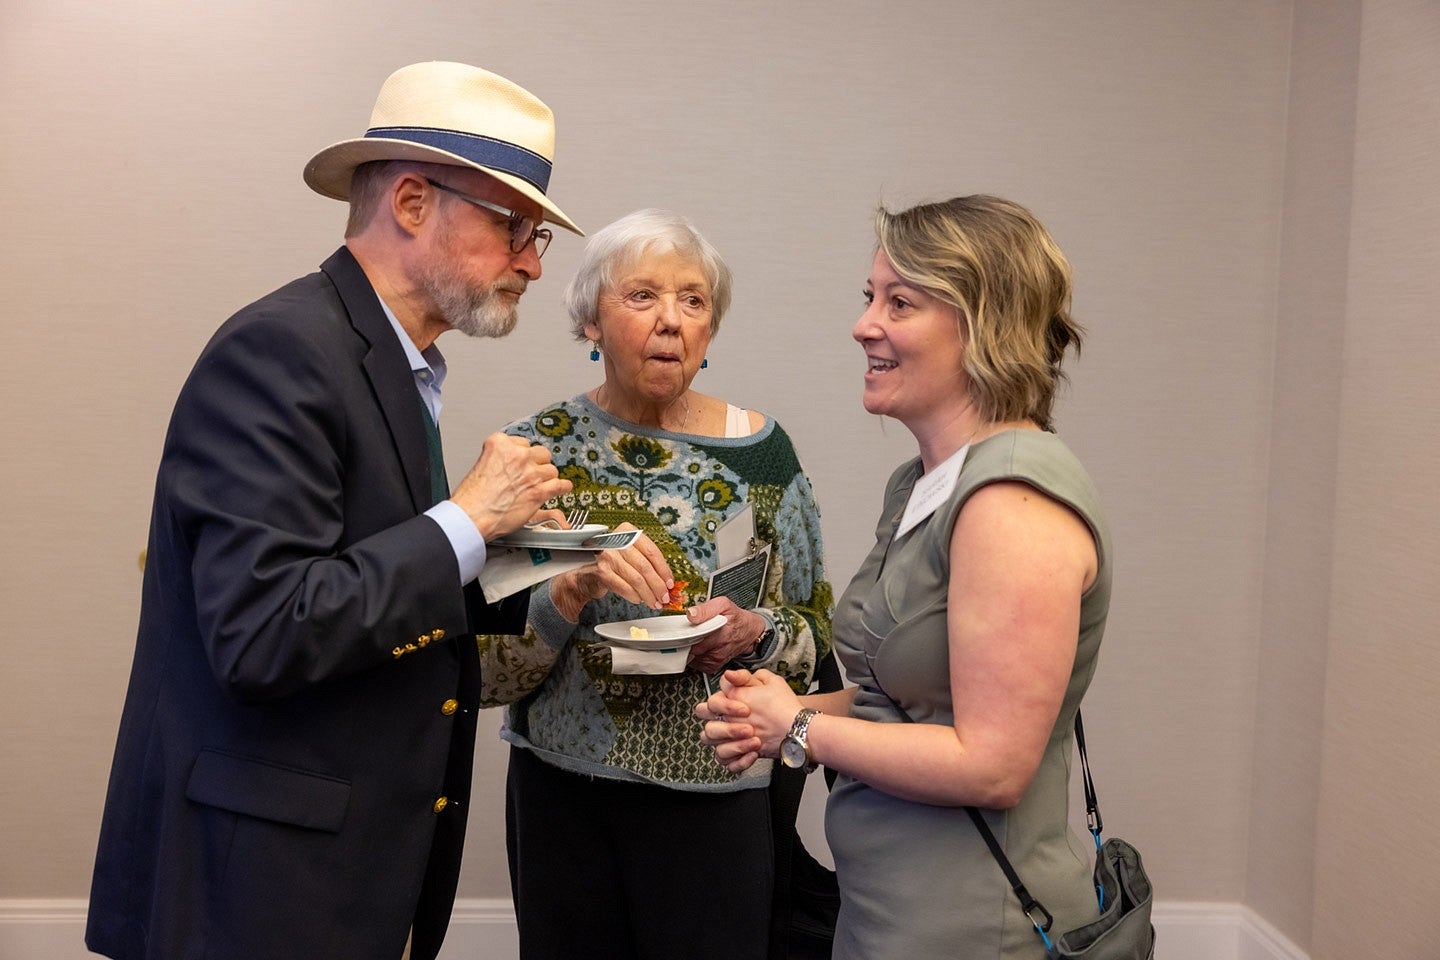 A man and two women speaking to each other while eating hors d'oeuvres with a white wall behind them.